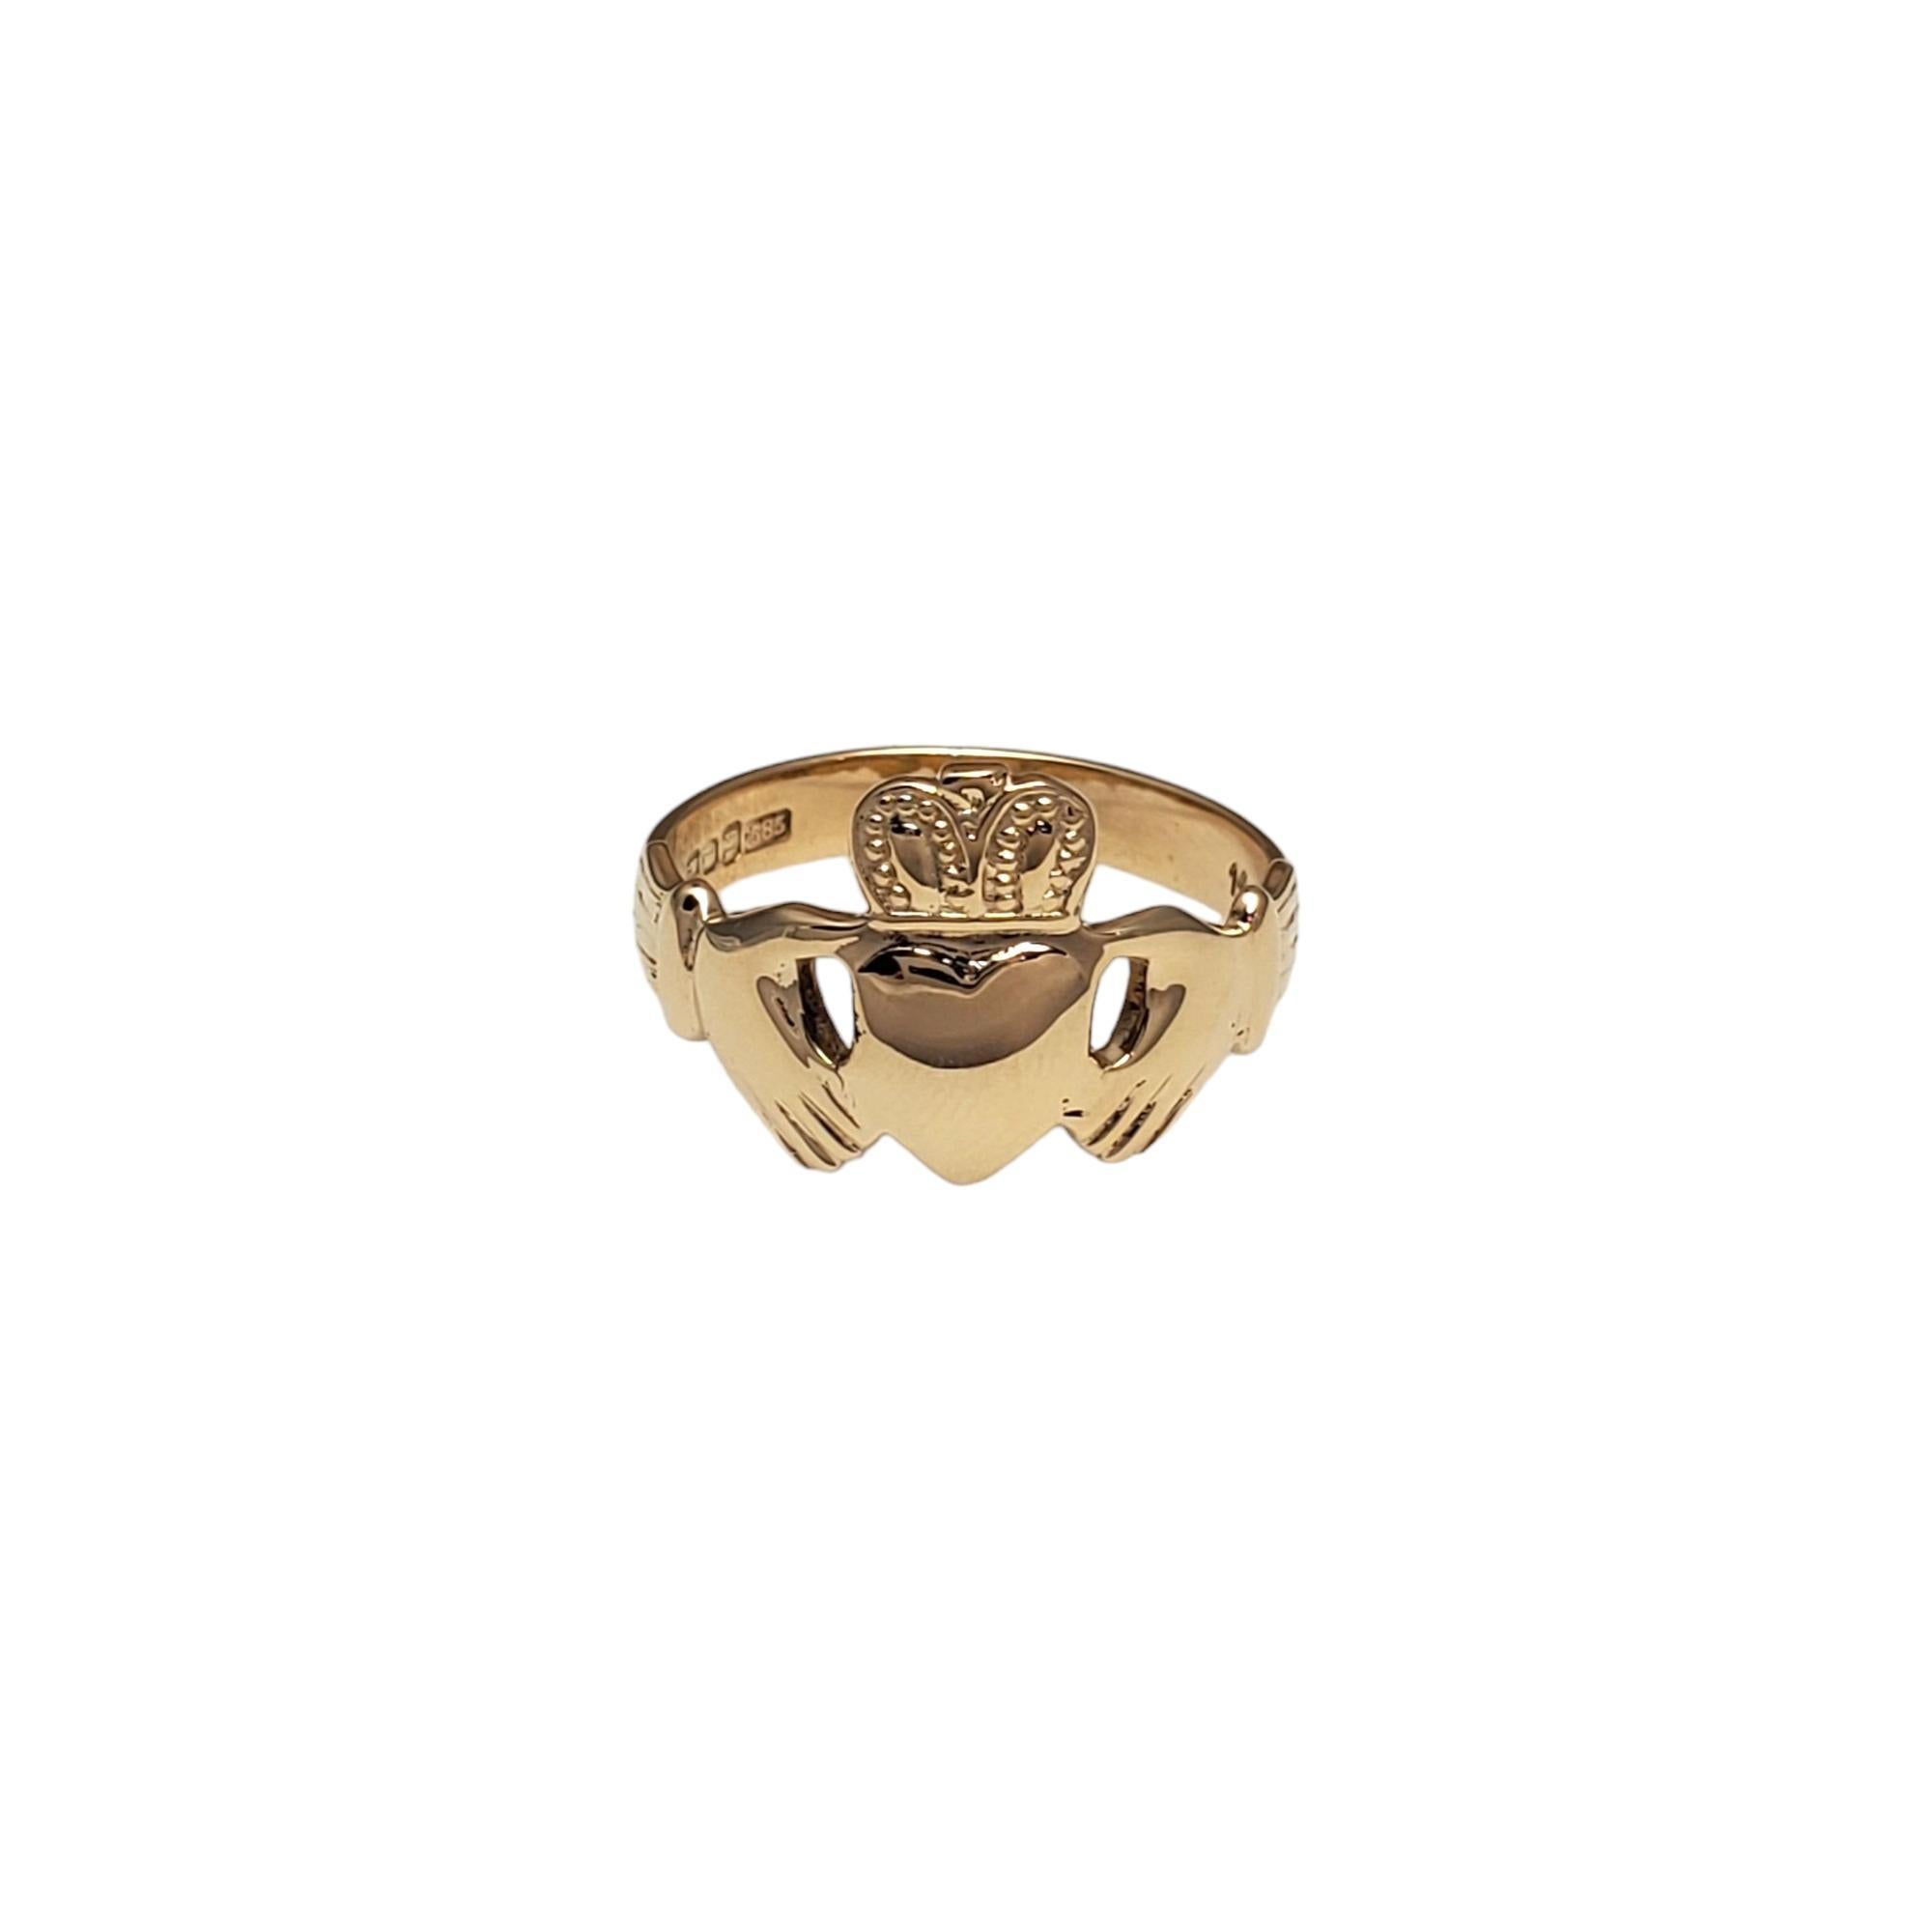 Vintage 14K Yellow Gold Man's Claddagh Ring-

This classic Claddagh ring is an impressive symbol of Irish culture. 

Size:  9.75

Weight:  3.9 dwt./  6.2 gr.

Stamped:  585 14CT O'C Made in Ireland

Front of ring is approx. 13.6 mm x 22.4mm

Will